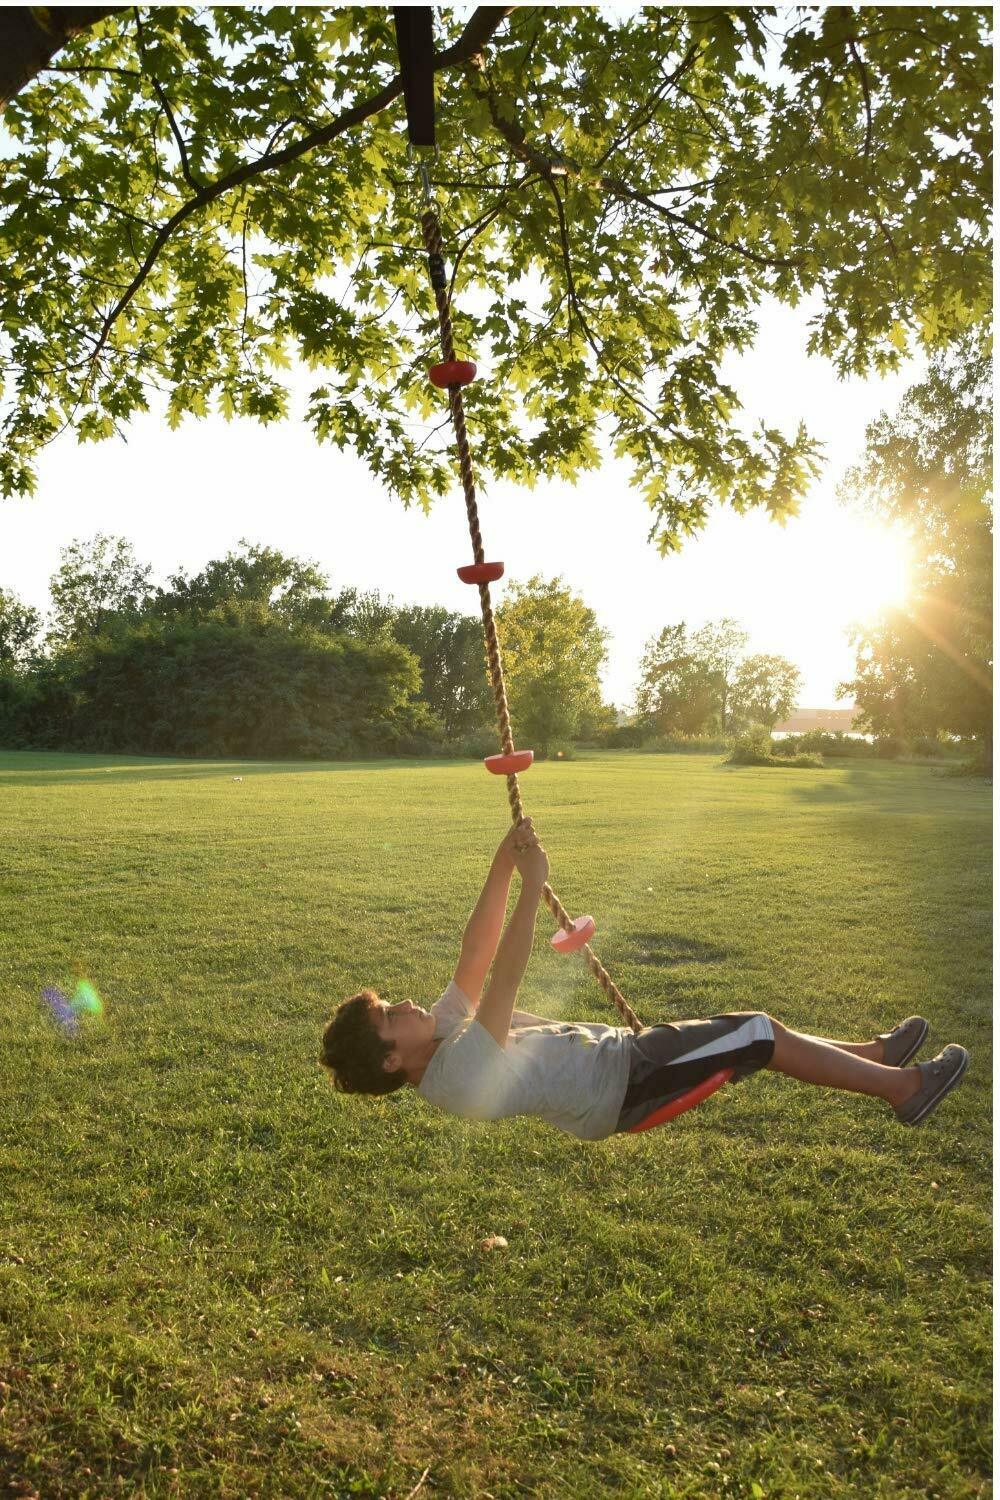 Tree Climbing Rope and Kids Outdoor Swing with Foot Hold Platforms